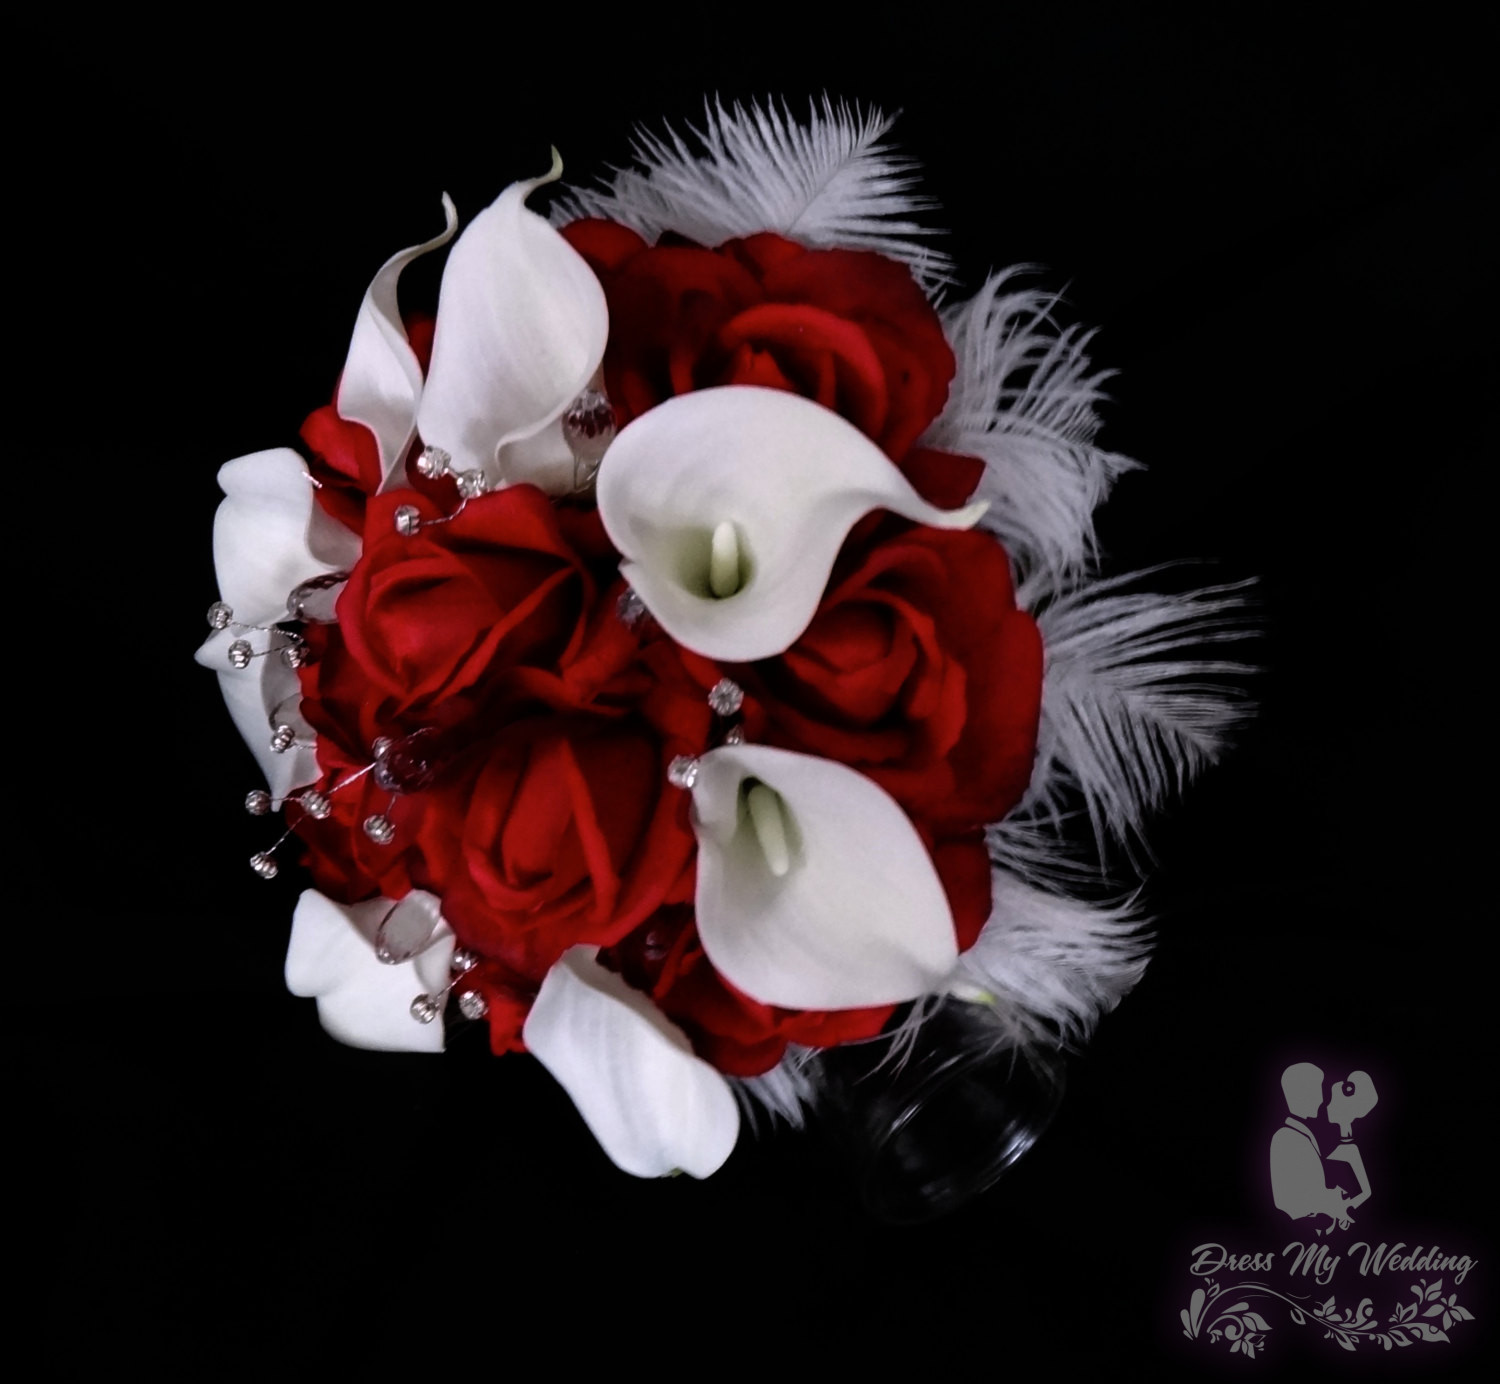 Dress My Wedding – Red and white bouquet, bridal bouquet, red, white, rose, calla lily bridal bouquet, flowers, white